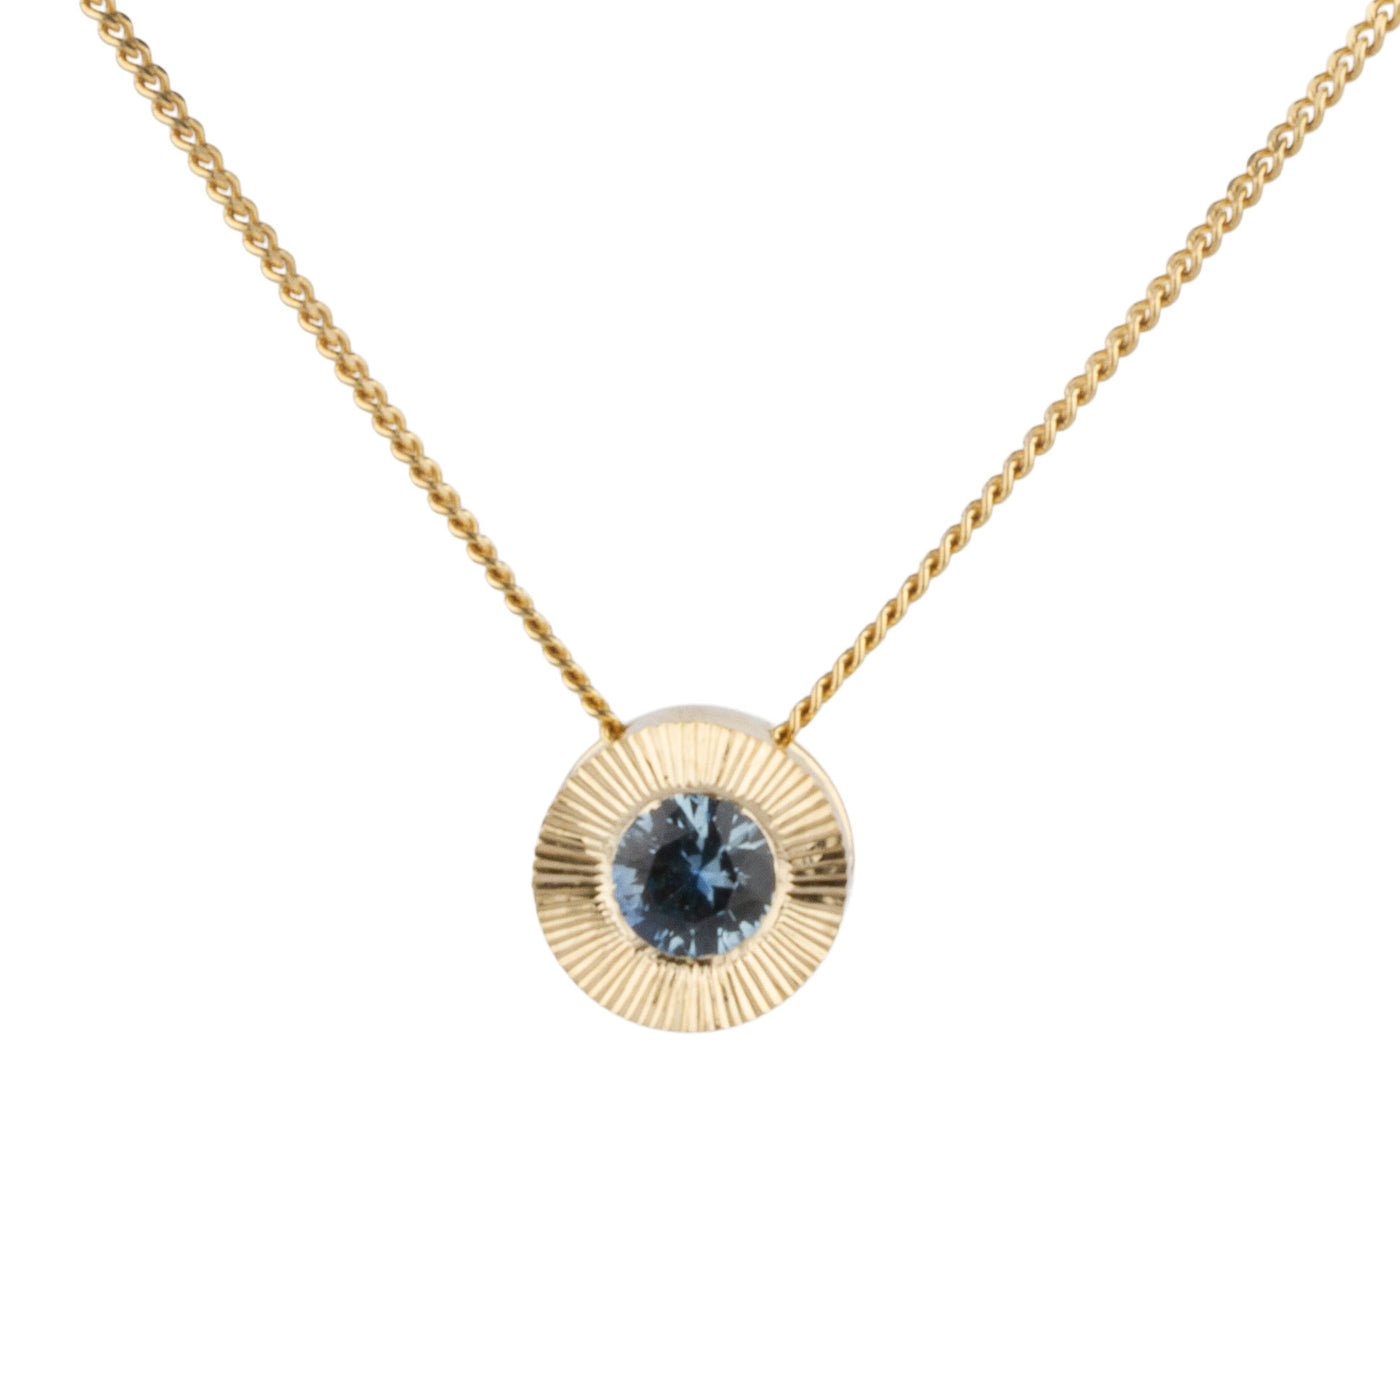 14k yellow gold large aurora necklace with a denim blue Montana sapphire center and engraved halo border on a white background